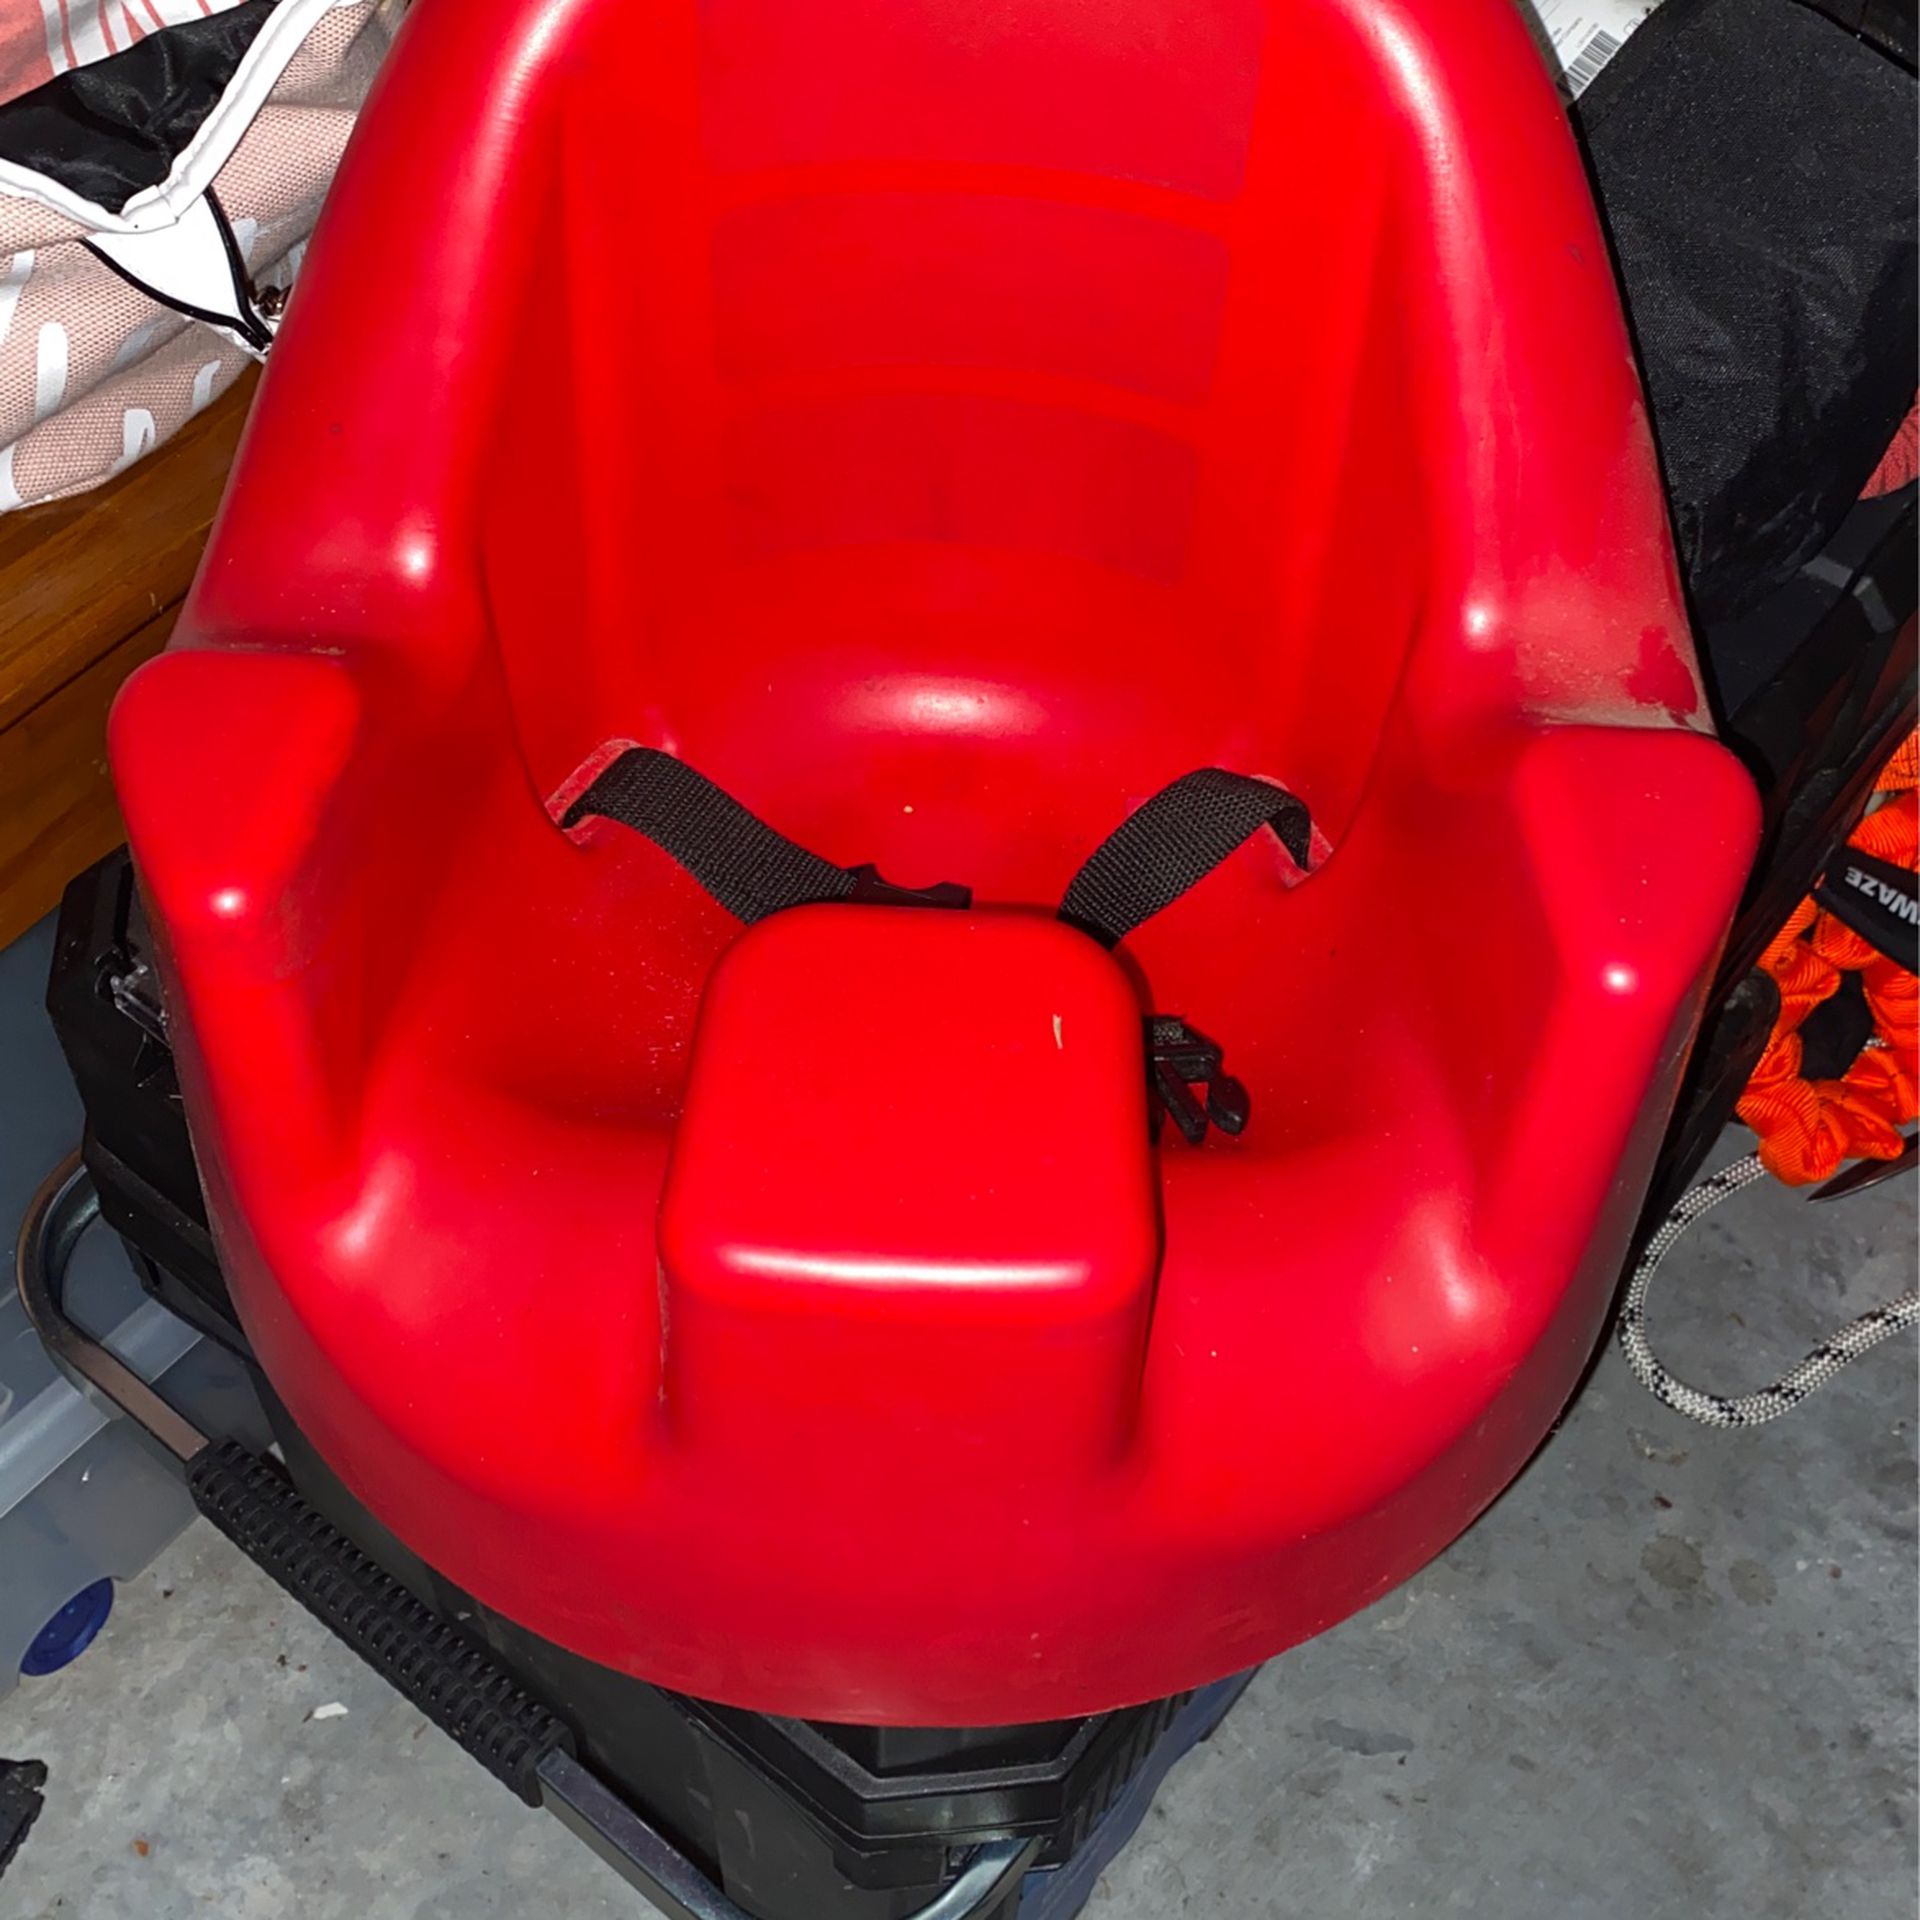 Red Bumbo Chair